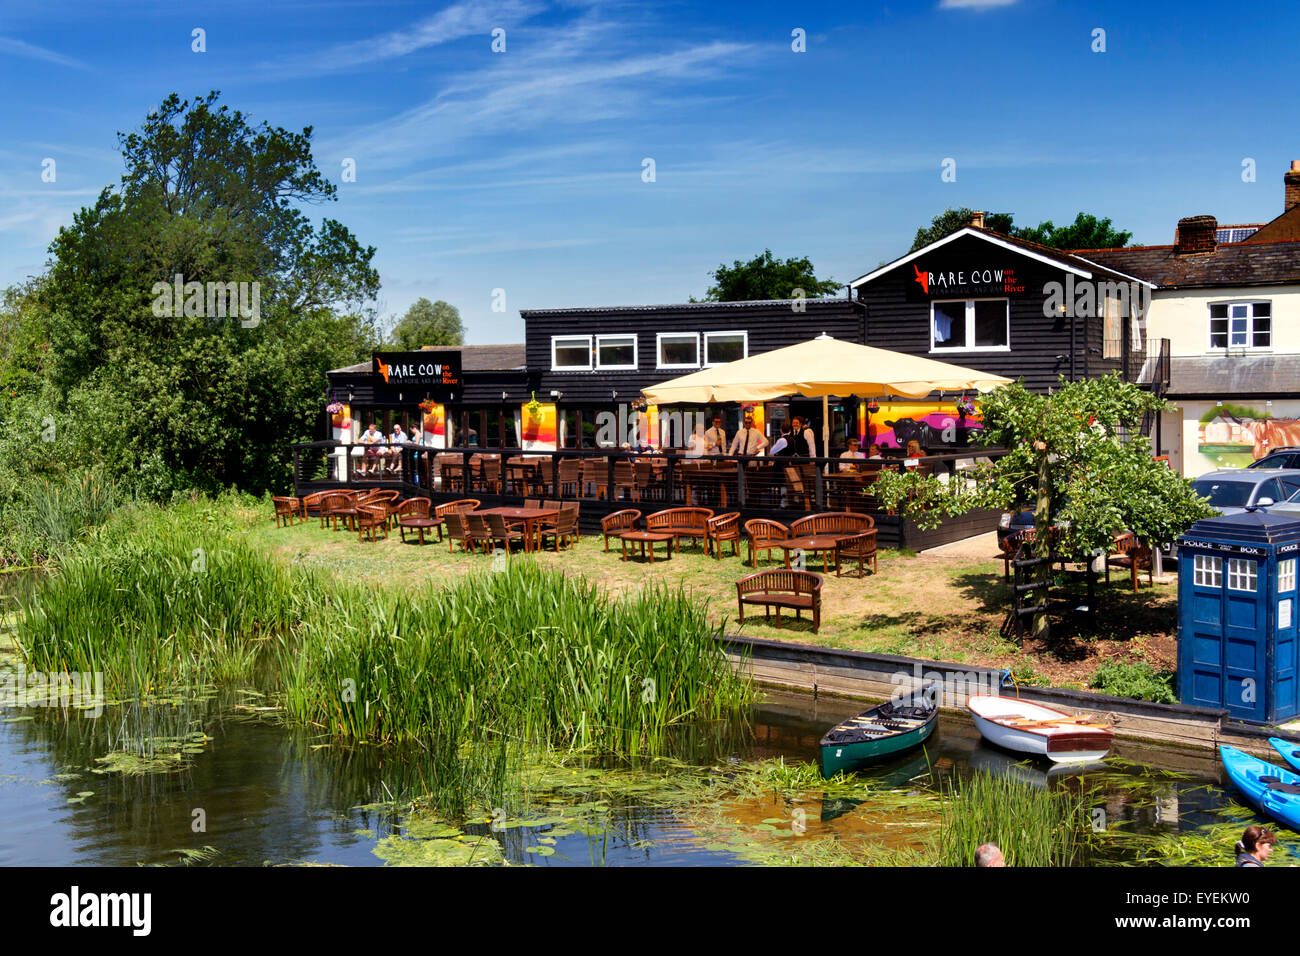 The Rare Cow Restaurant, by the River Stour, Sudbury, Suffolk, UK Stock Photo